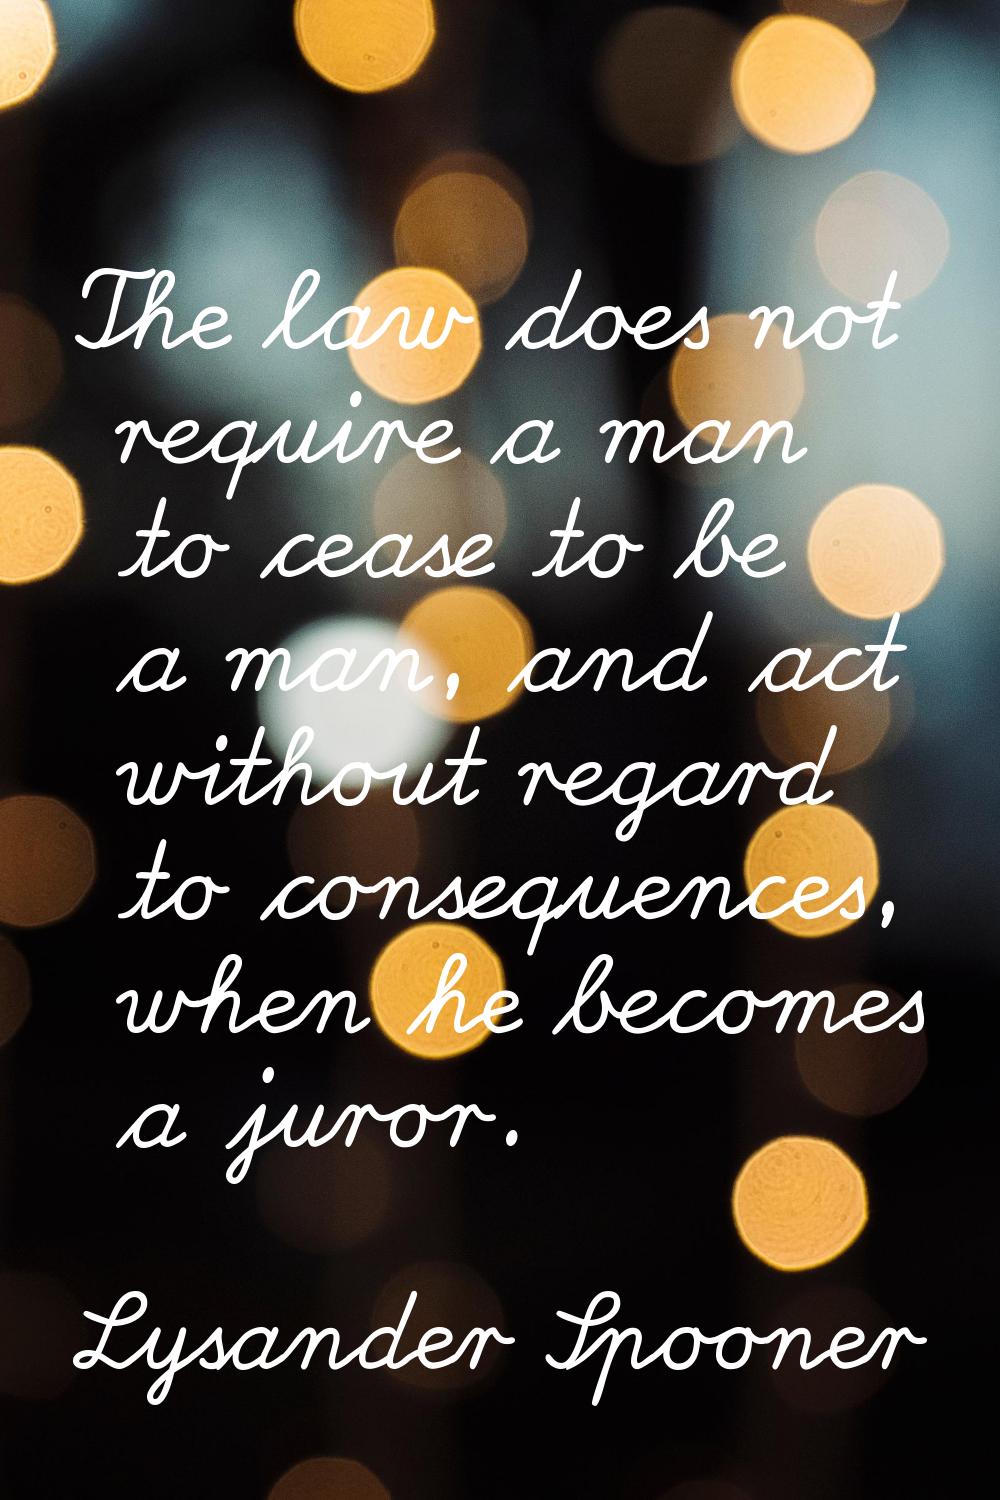 The law does not require a man to cease to be a man, and act without regard to consequences, when h